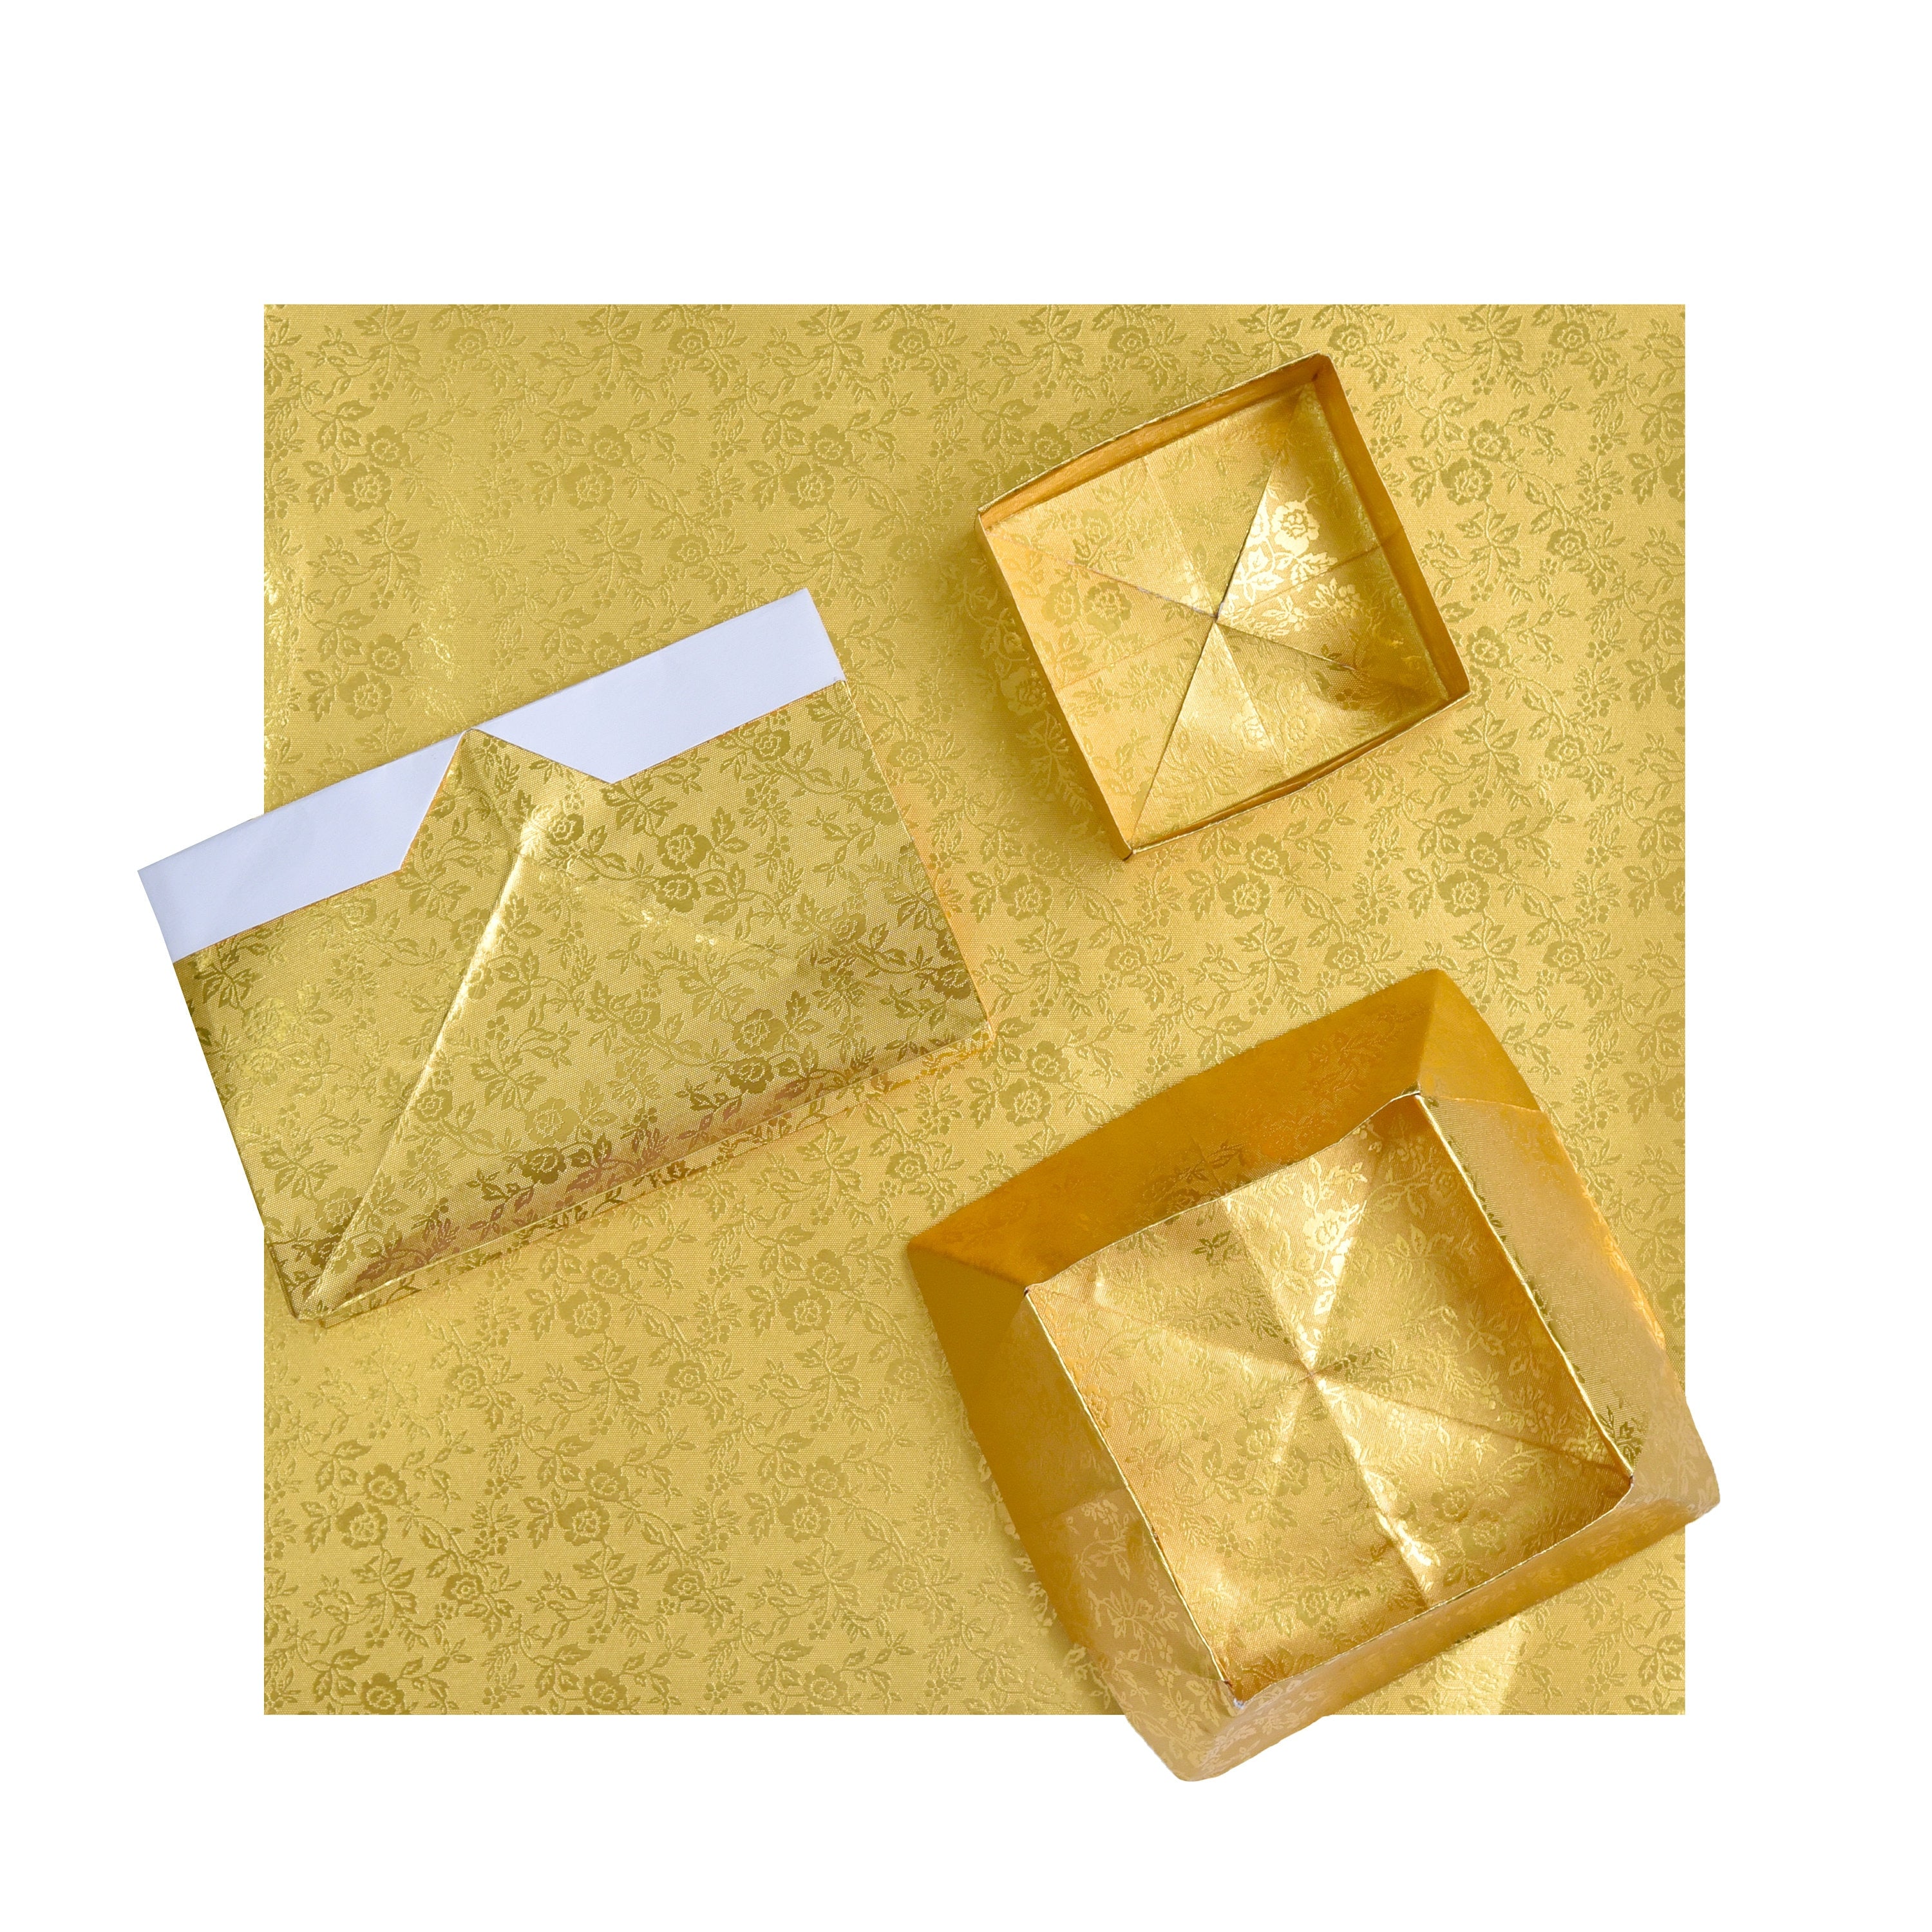 12 Sheets 12x12 Gold Pearl Coated Origami Card stock 125GSM Ideal for Card Making, Scrapbooking, Invitations & Paper Crafts